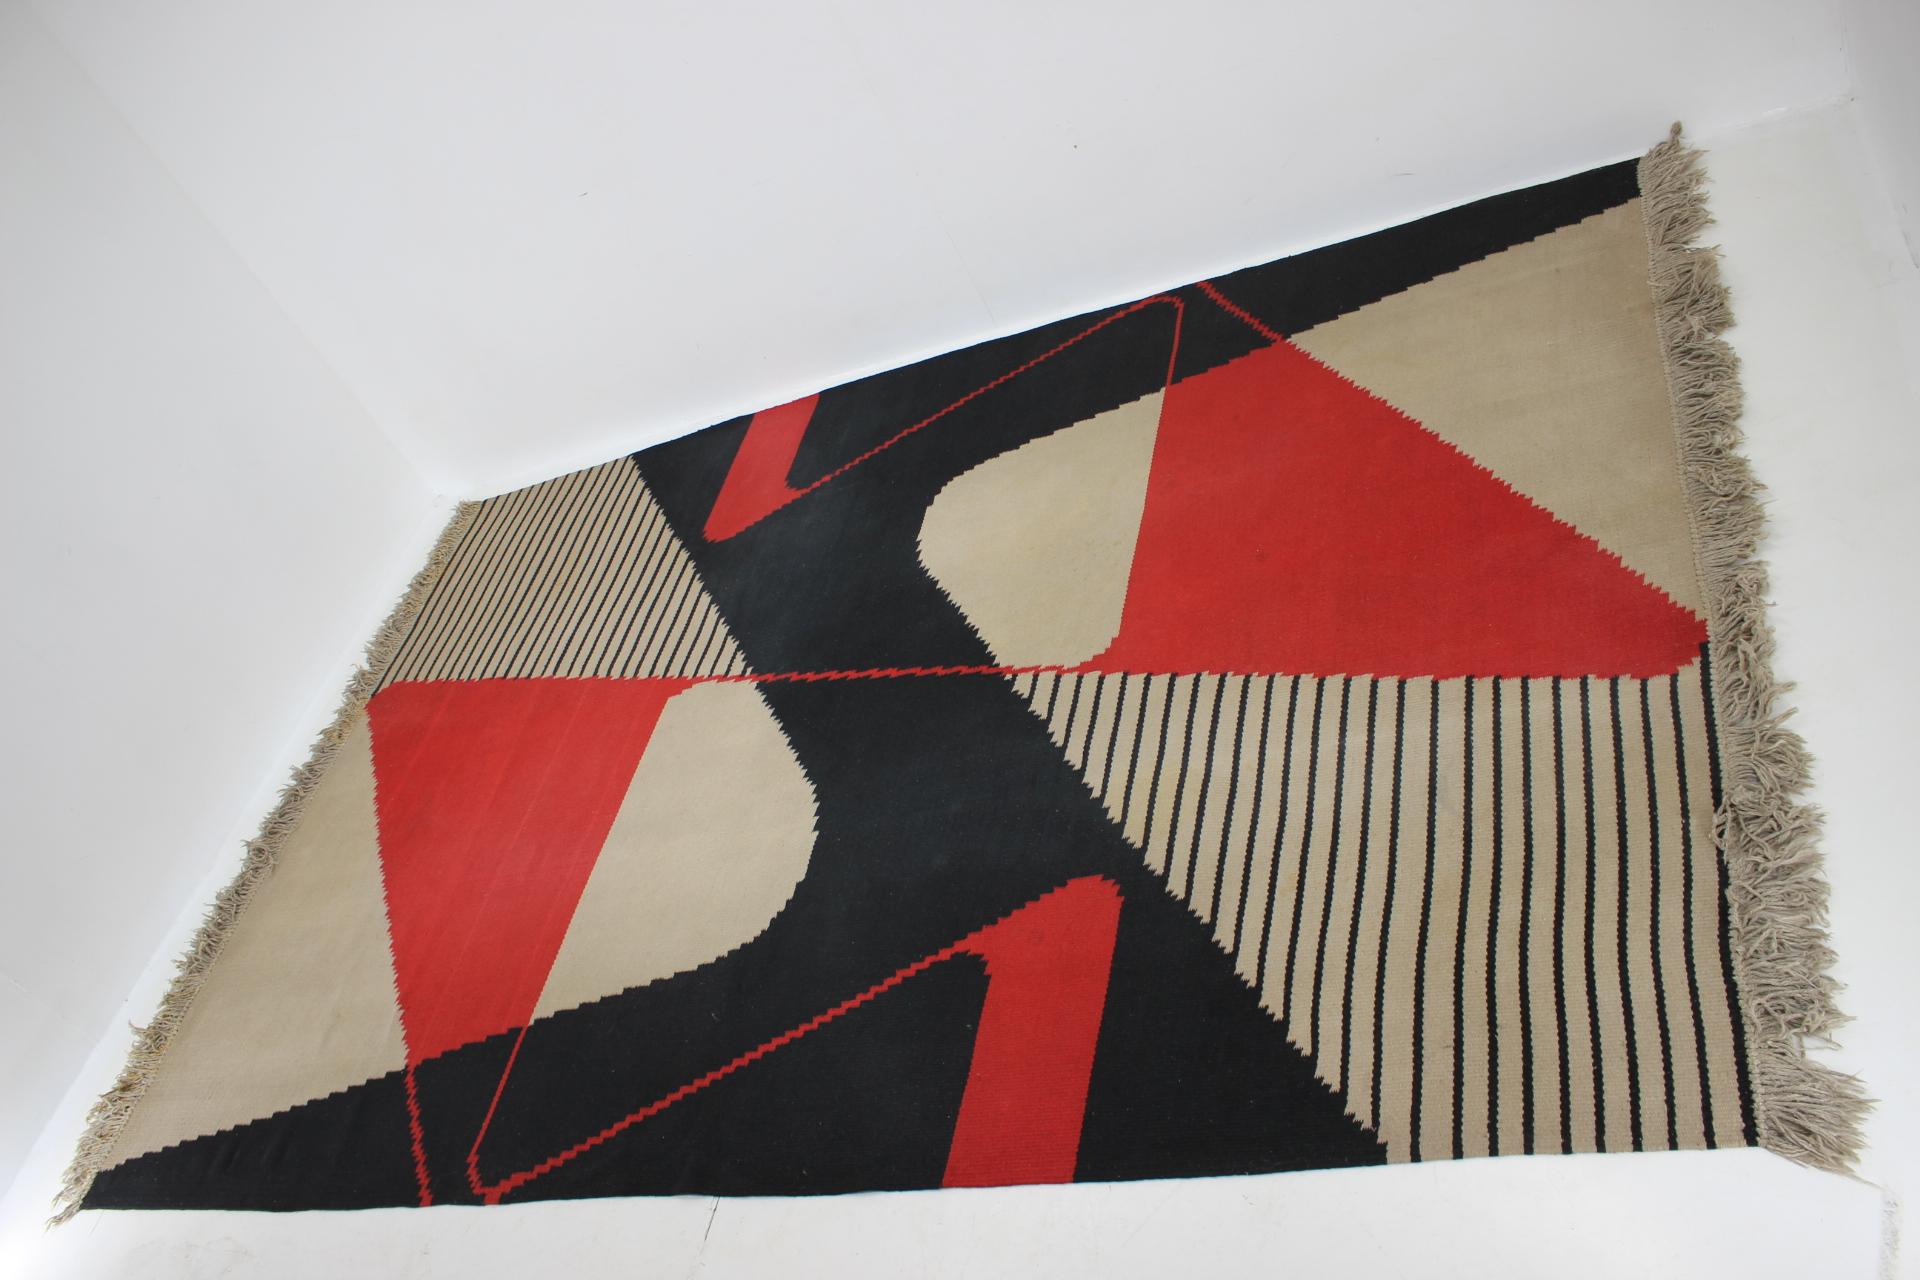 - around 1960s
- Czechoslovakia
- kilim, double sided
- original and good condition 
- well preserved, cleaned, few stains
jr.